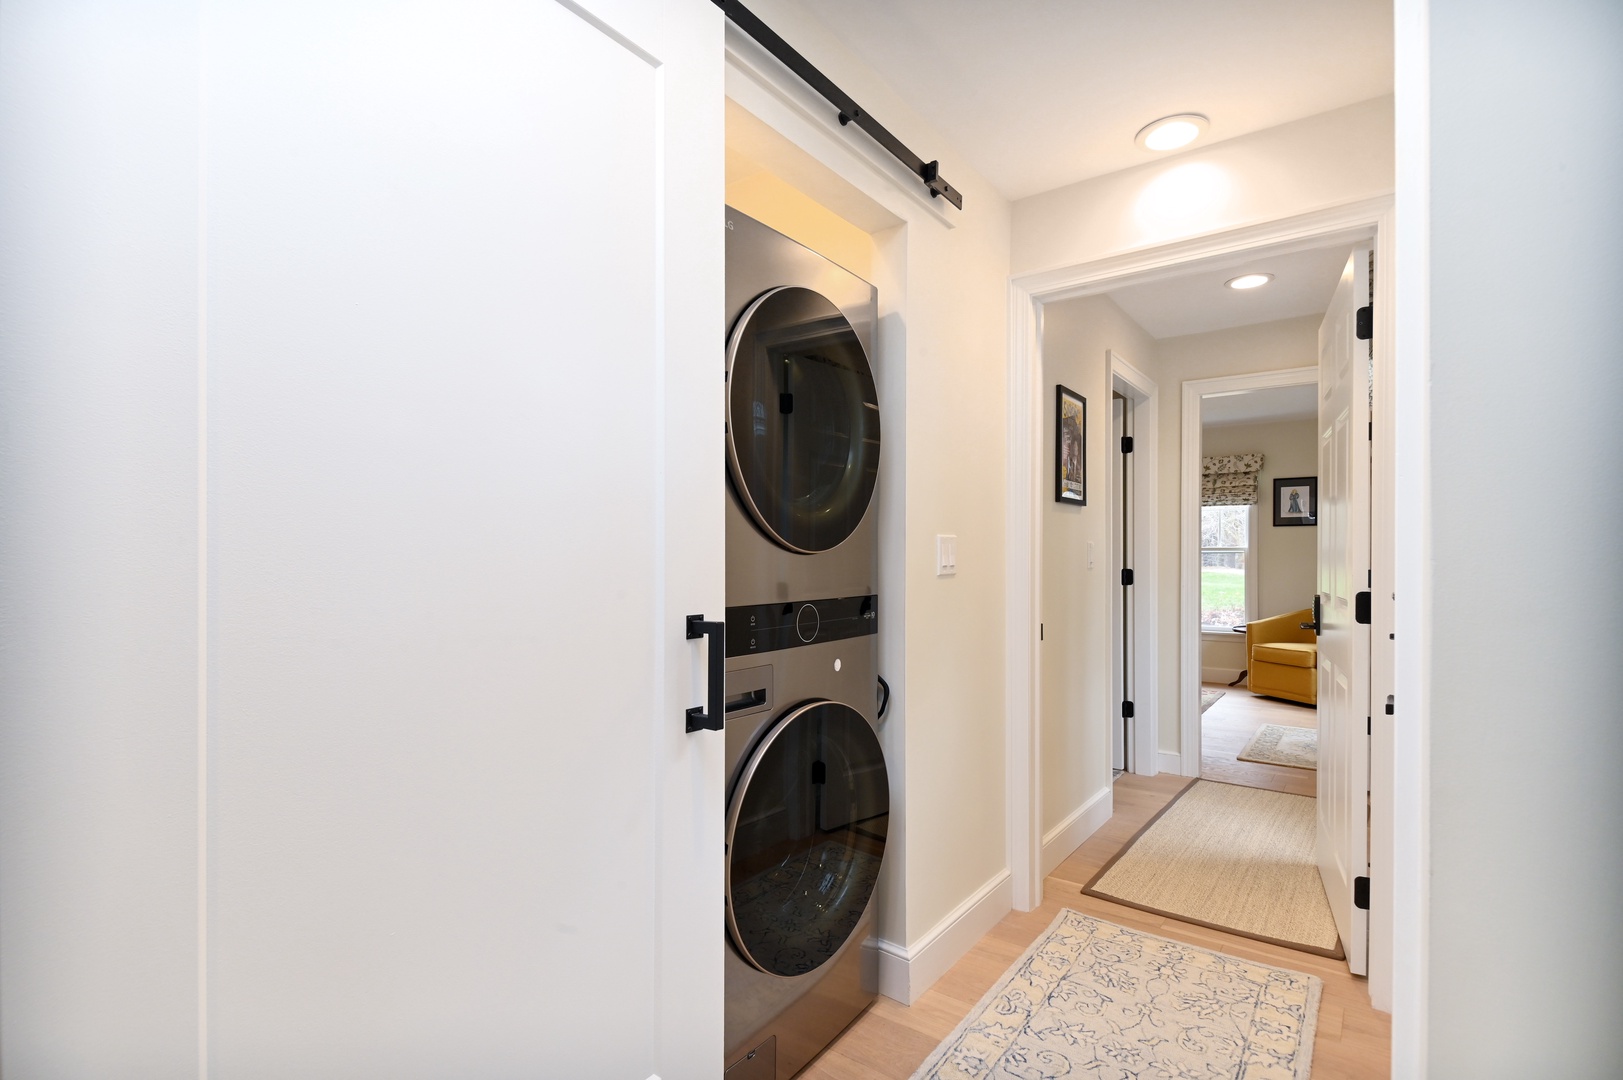 Communal laundry is available for your stay, tucked away in the entry hall